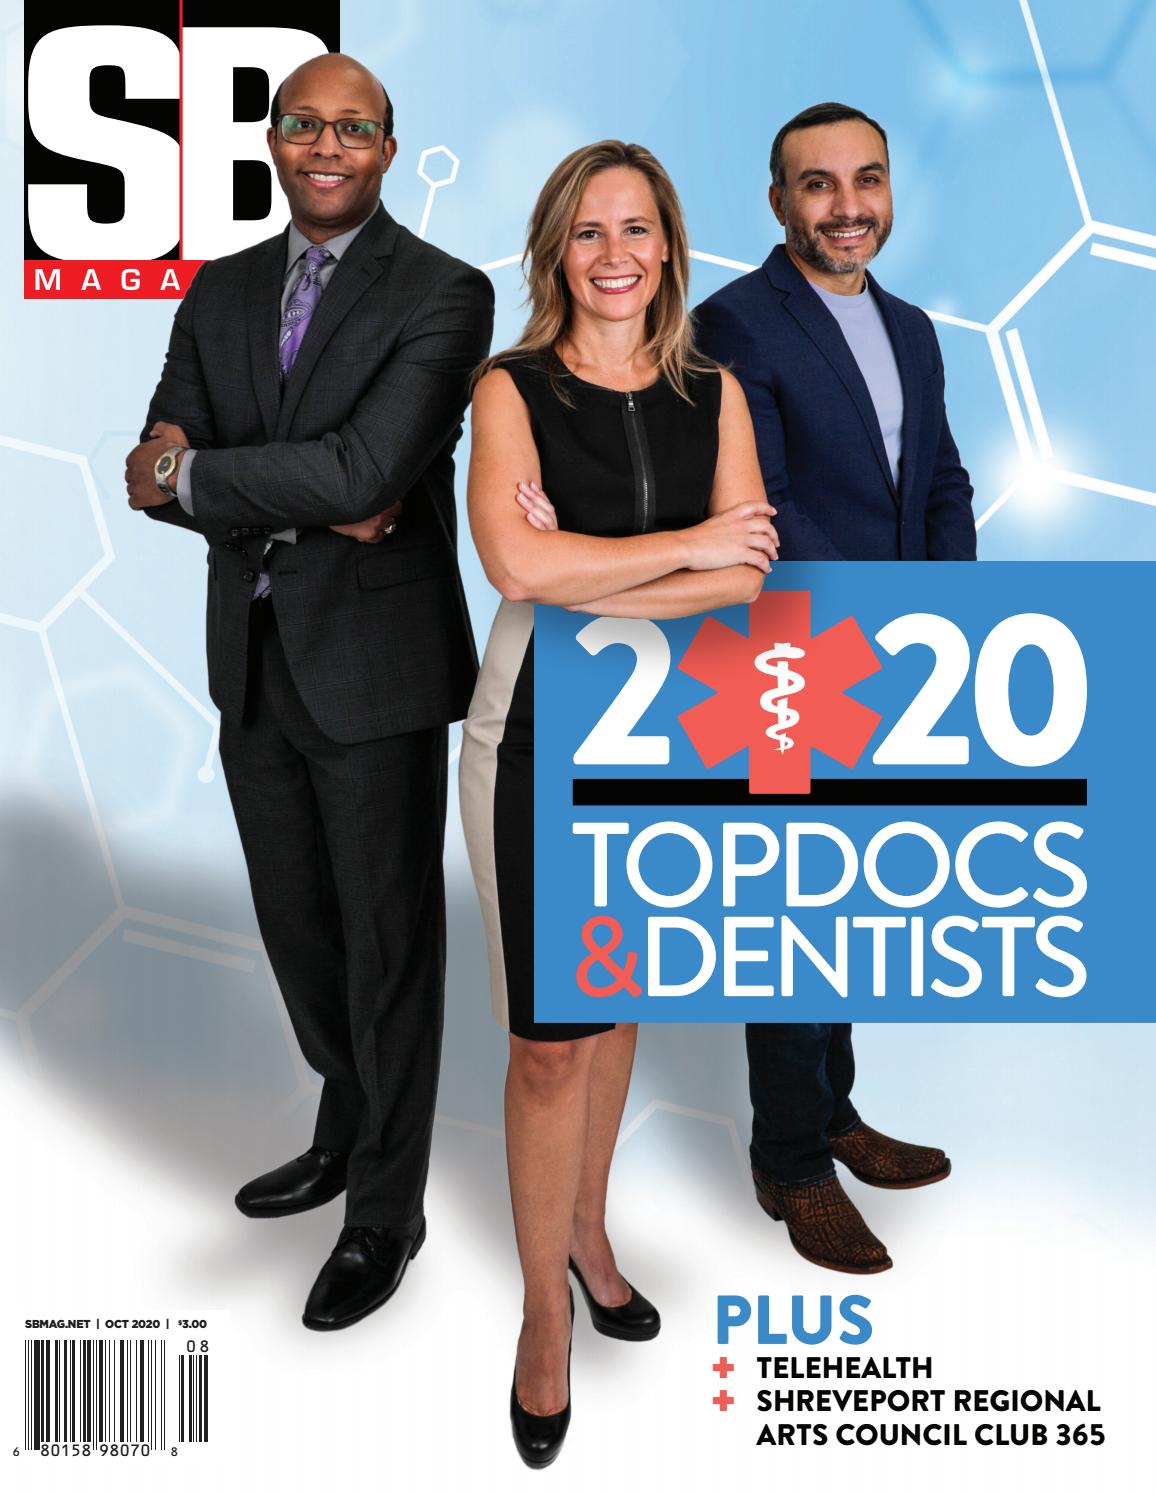   2020 TOP DOCTORS AND DENTISTS SB MAGAZINE